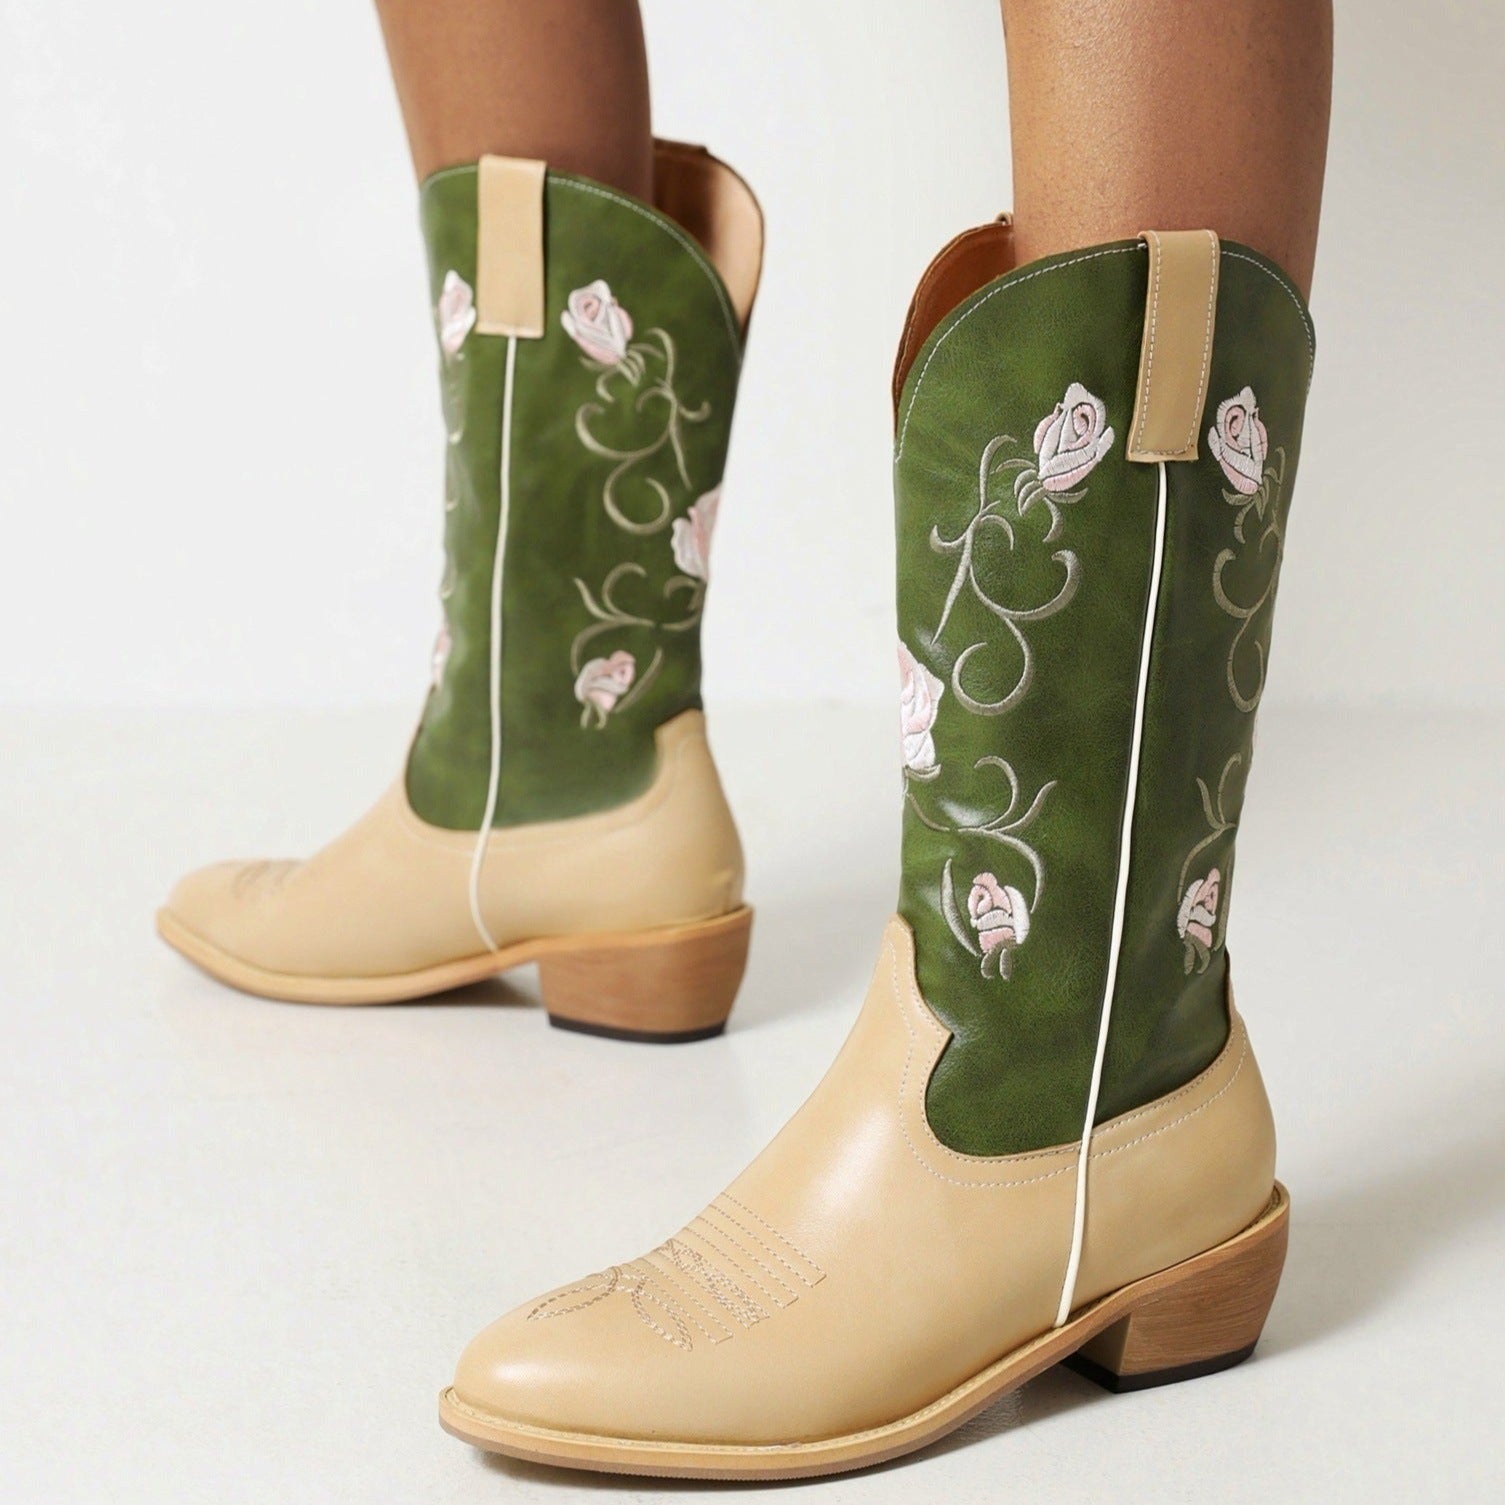 Green apricot patchwork embroidery mid calf cowboy boots for women